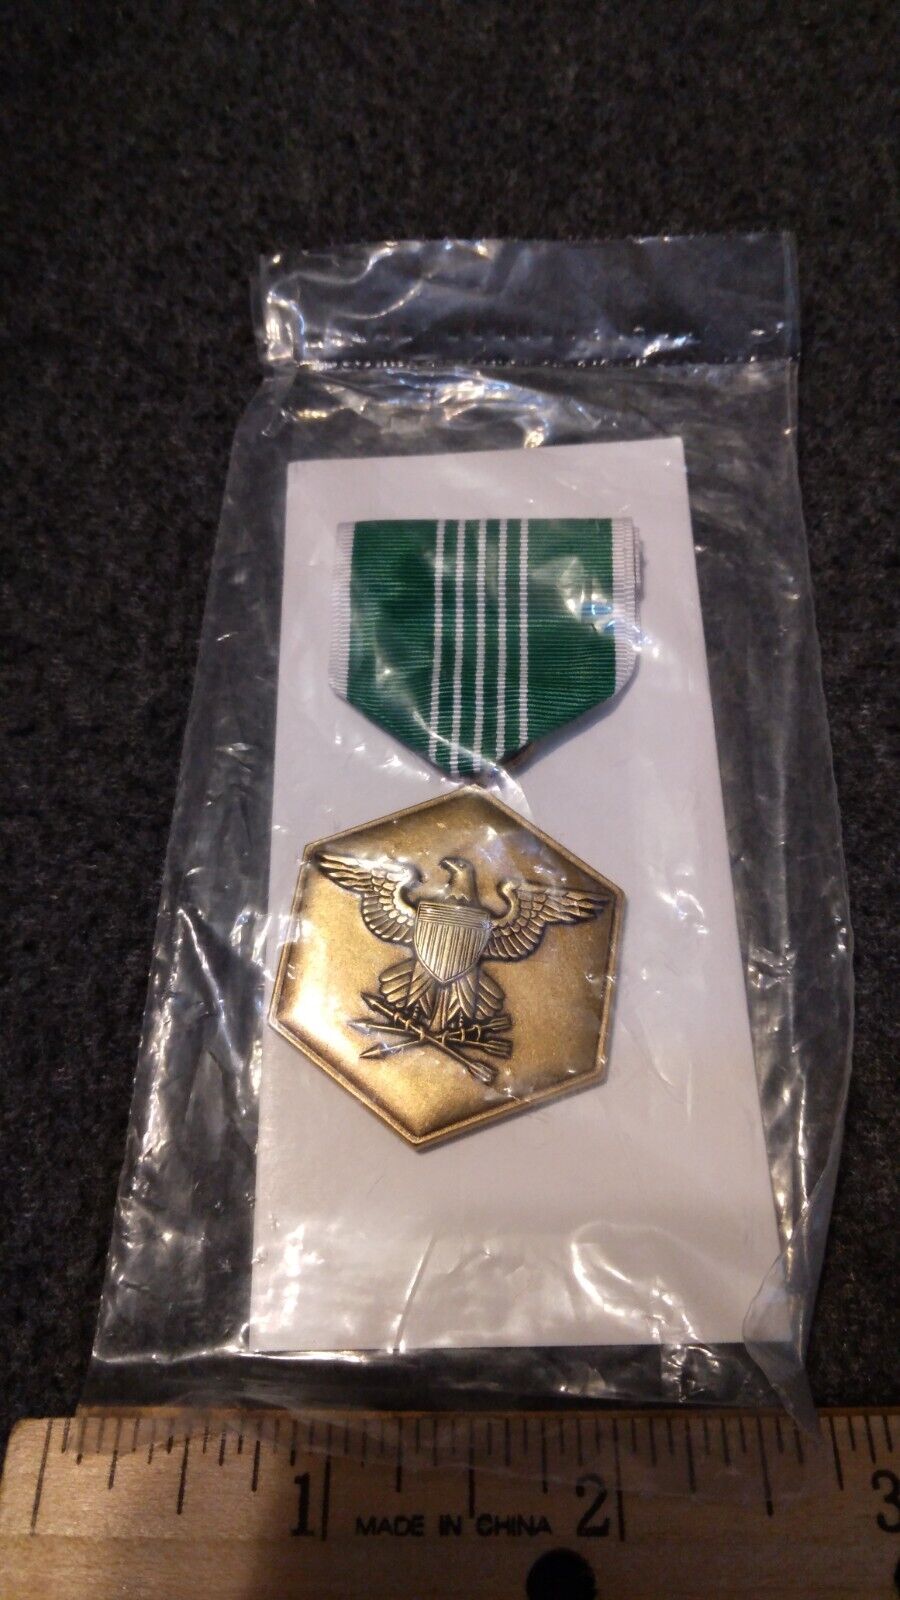 UNITED STATES ARMY- MEDAL FOR MILITARY MERIT - NEW SEALED